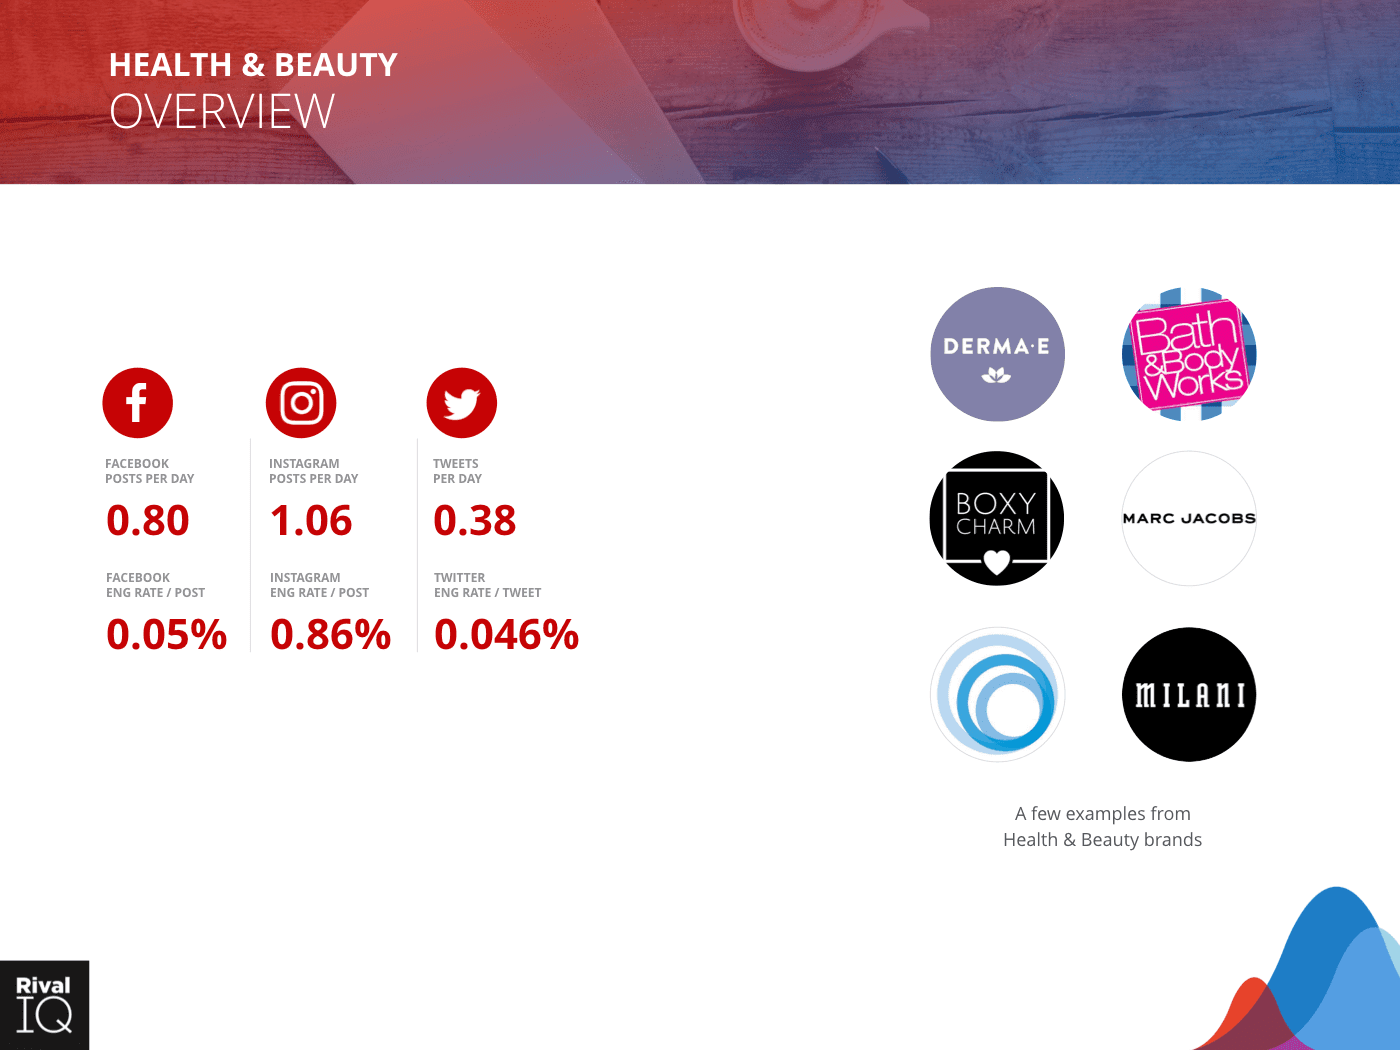 Average Instagram engagement rates for health and beauty brands.